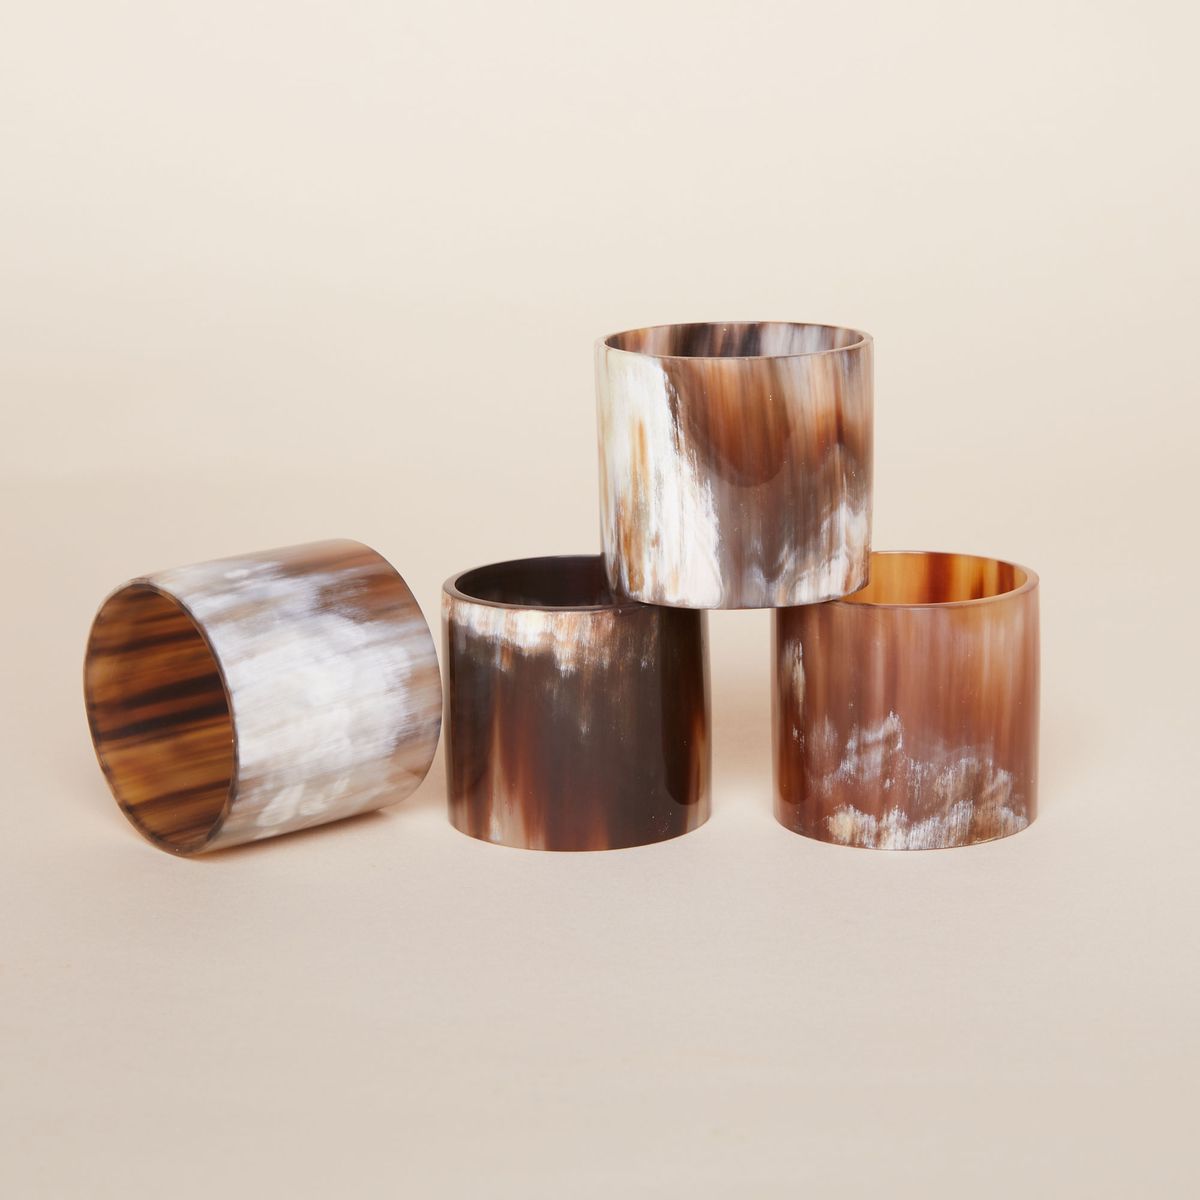 Four water buffalo horn napkin rings in shades of brown and white 